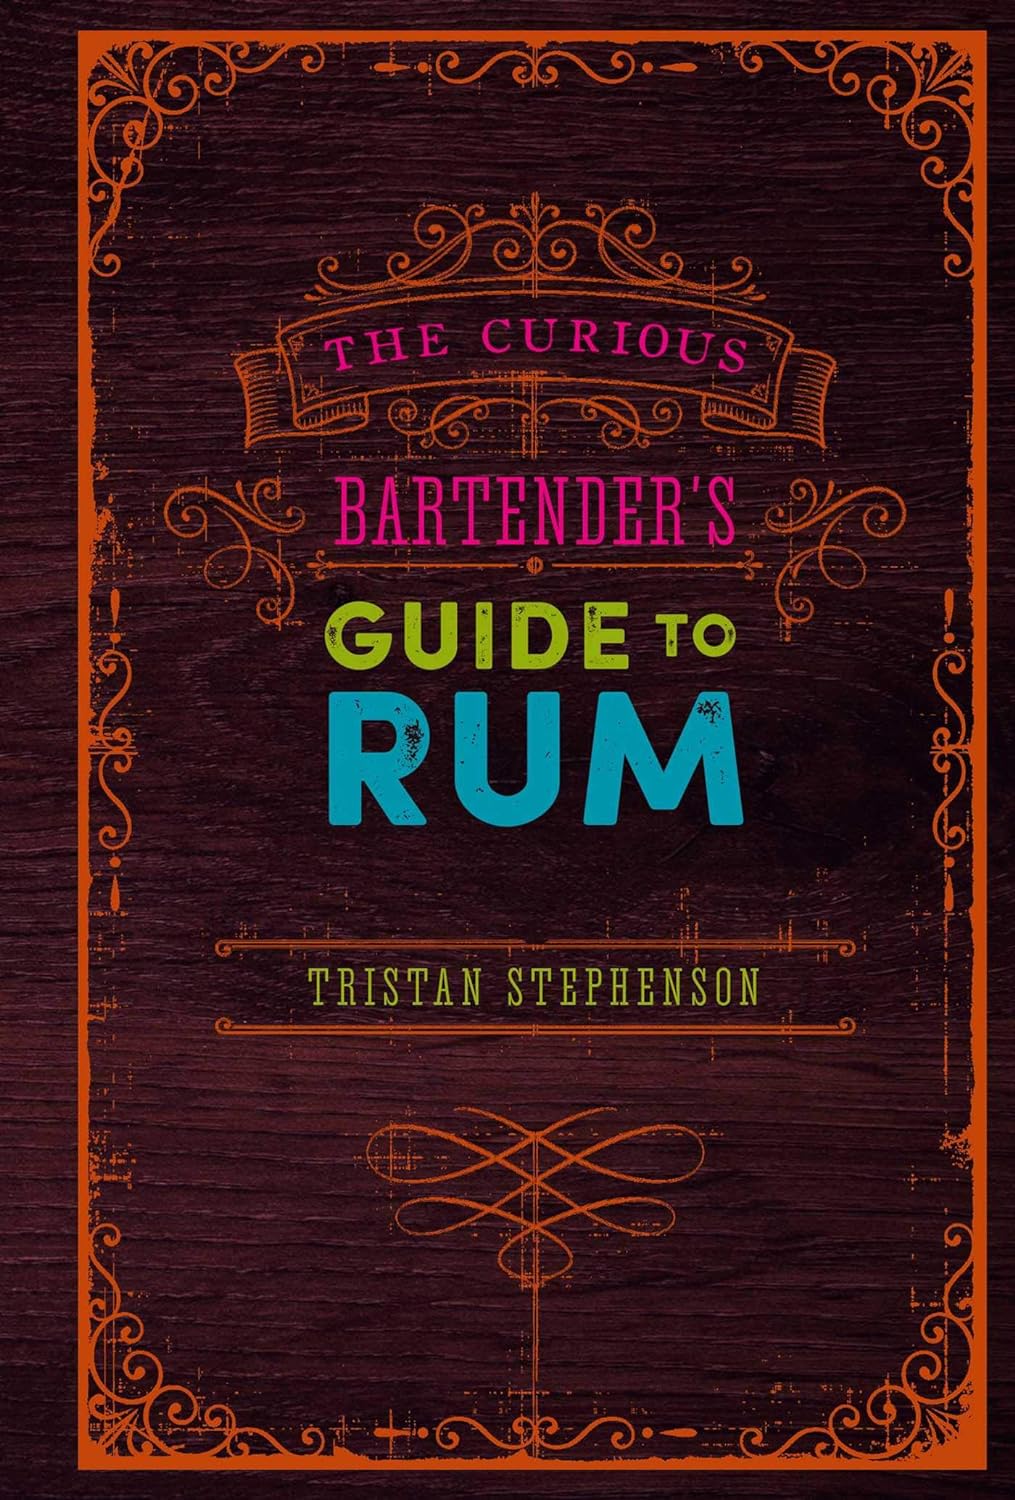 The Curious Bartender's Guide to Rum the curious bartender s guide to rum